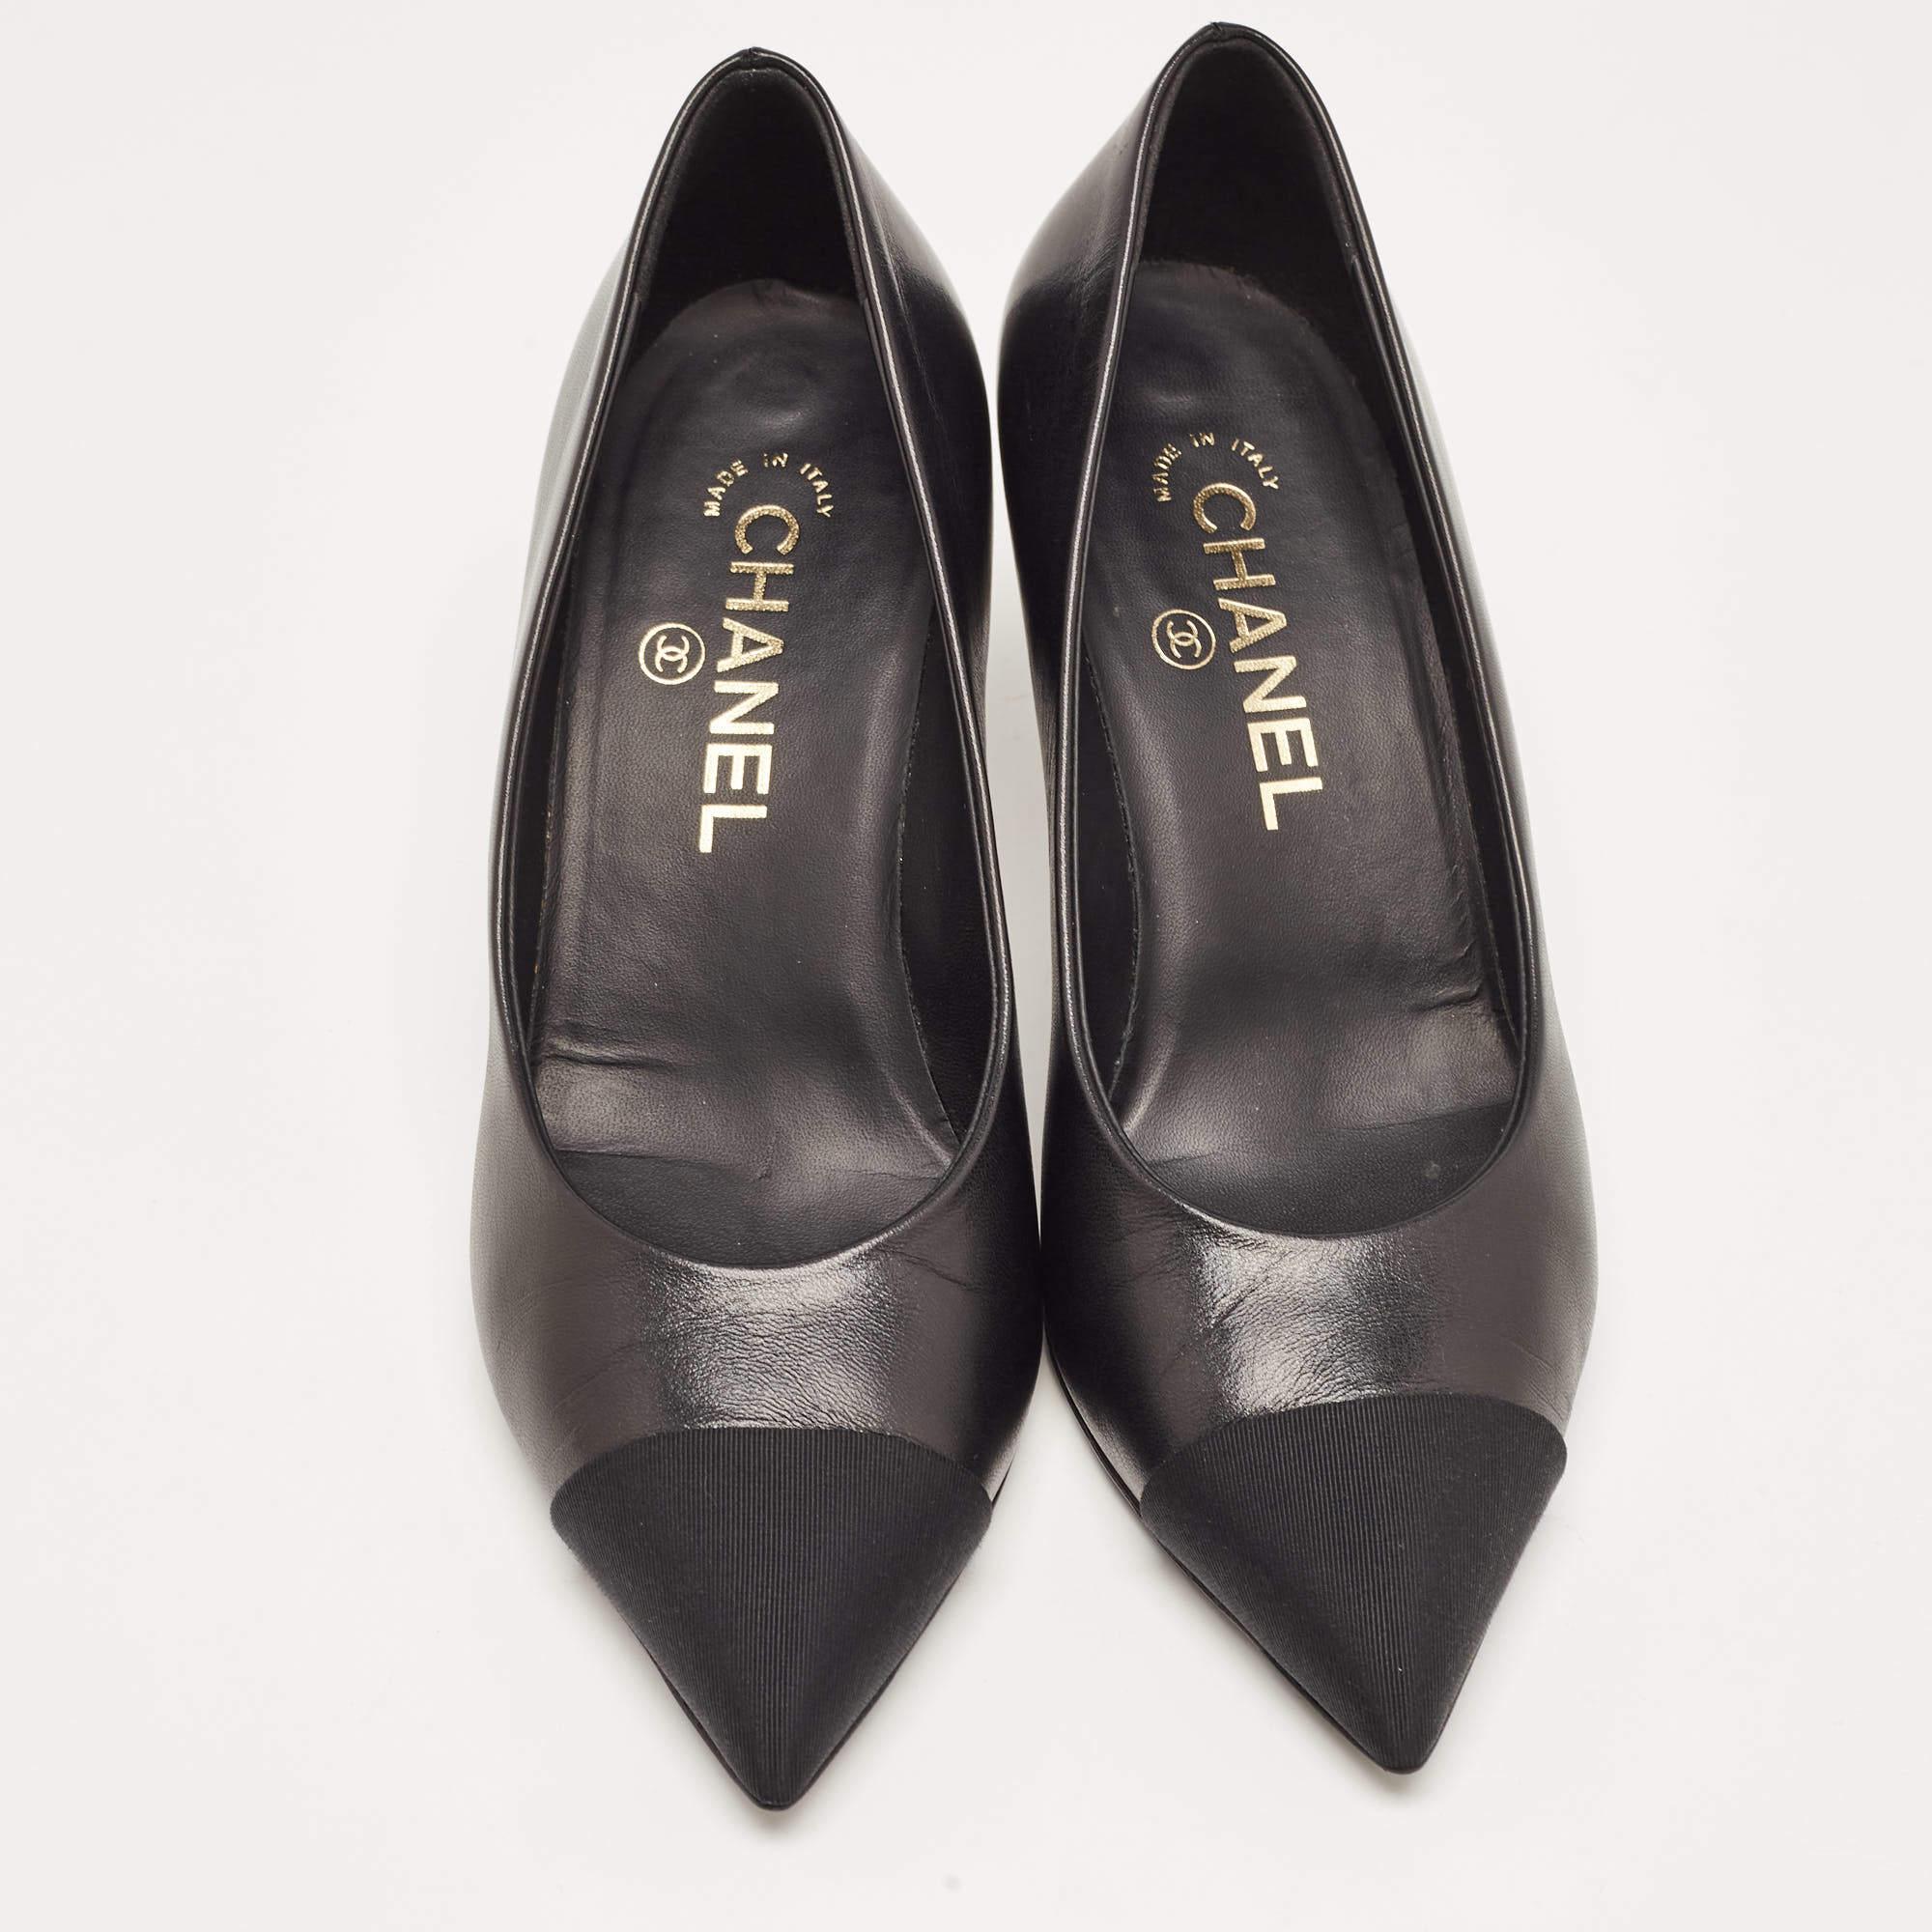 Perfectly sewn and finished to ensure an elegant look and fit, these Chanel shoes are a purchase you'll love flaunting. They look great on the feet.

Includes: Original Box, Info Booklet, Extra Heel Tips, Original Dustbag